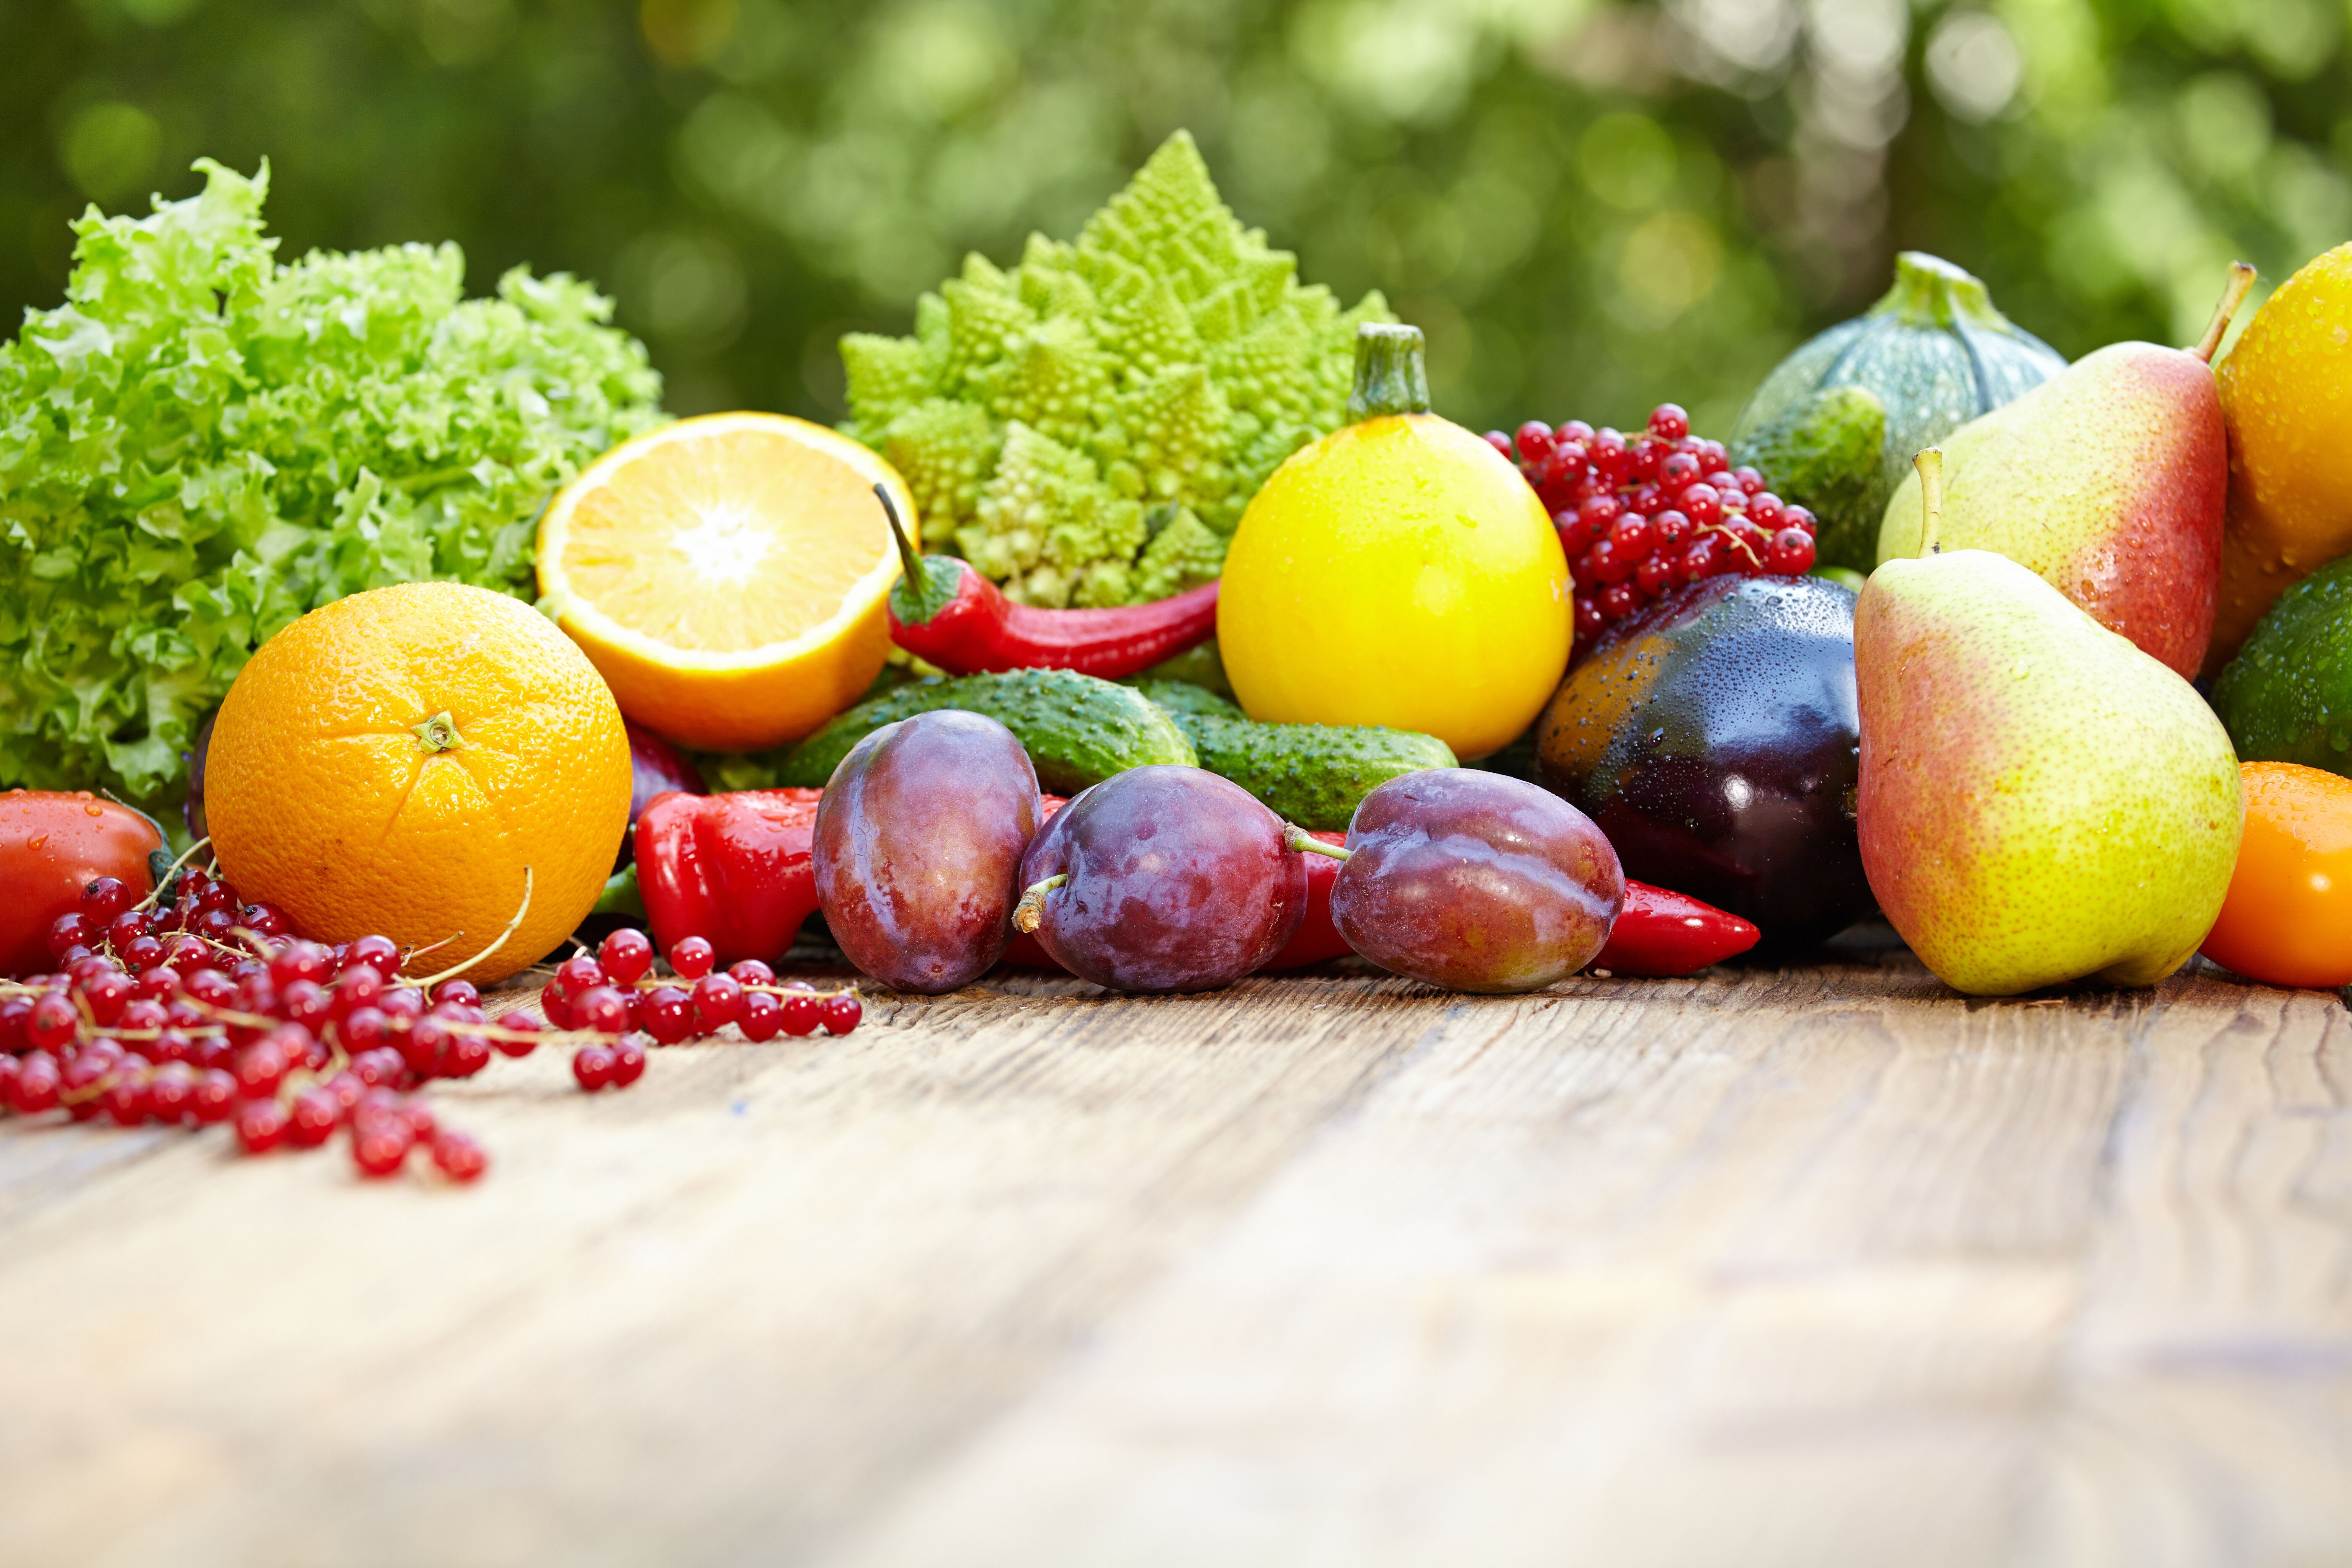 Fruits & Vegetables Wallpaper and Background Image